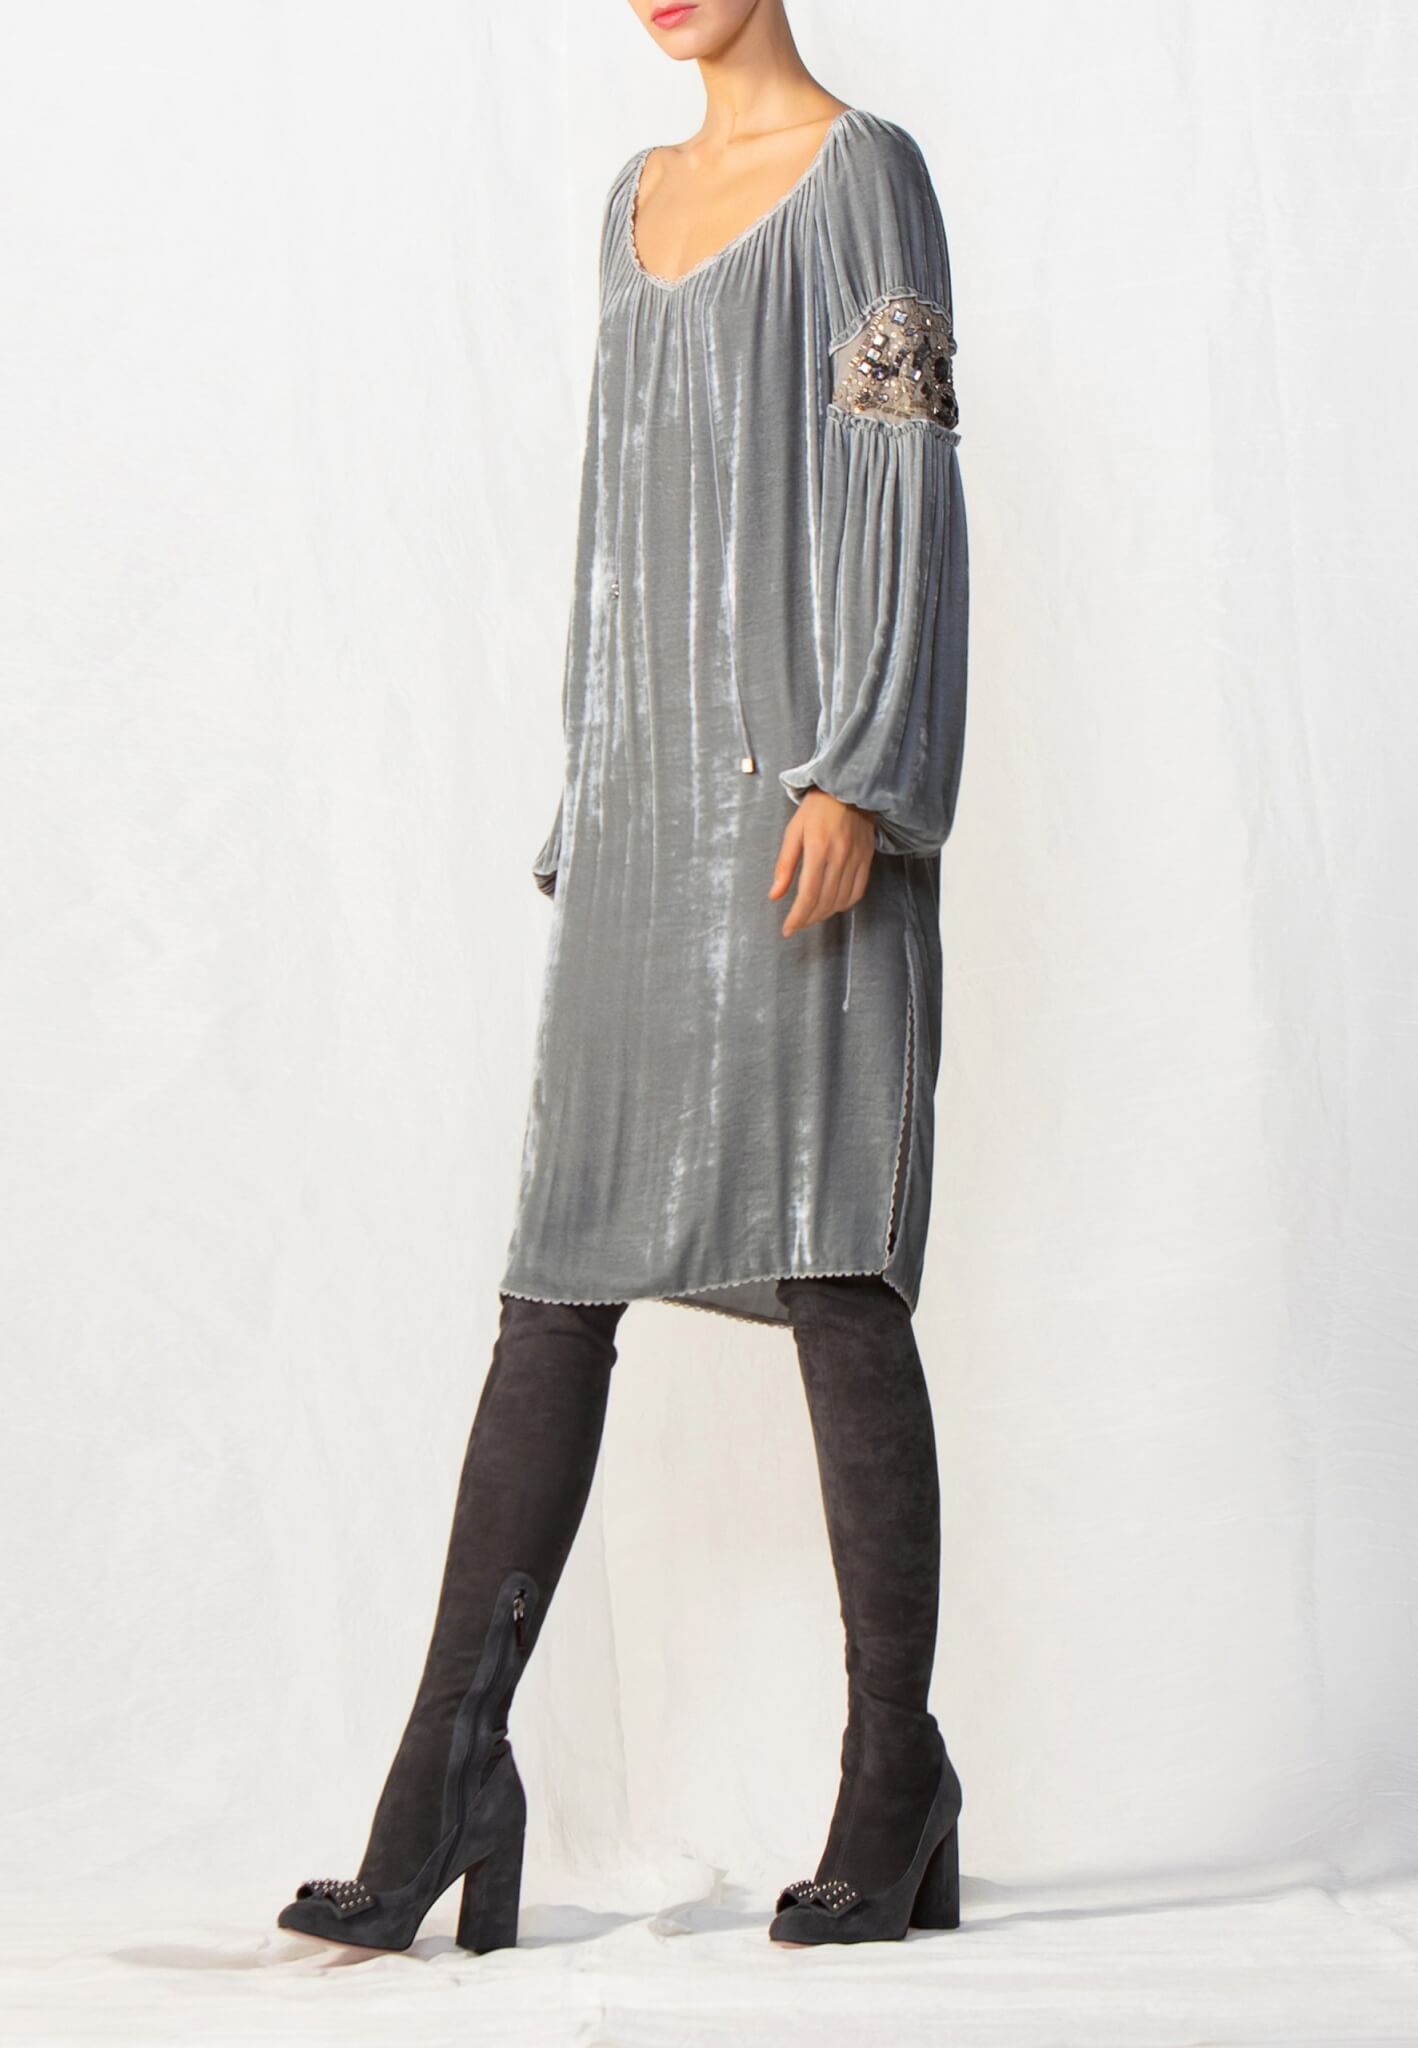 Velour dress with lace and beads